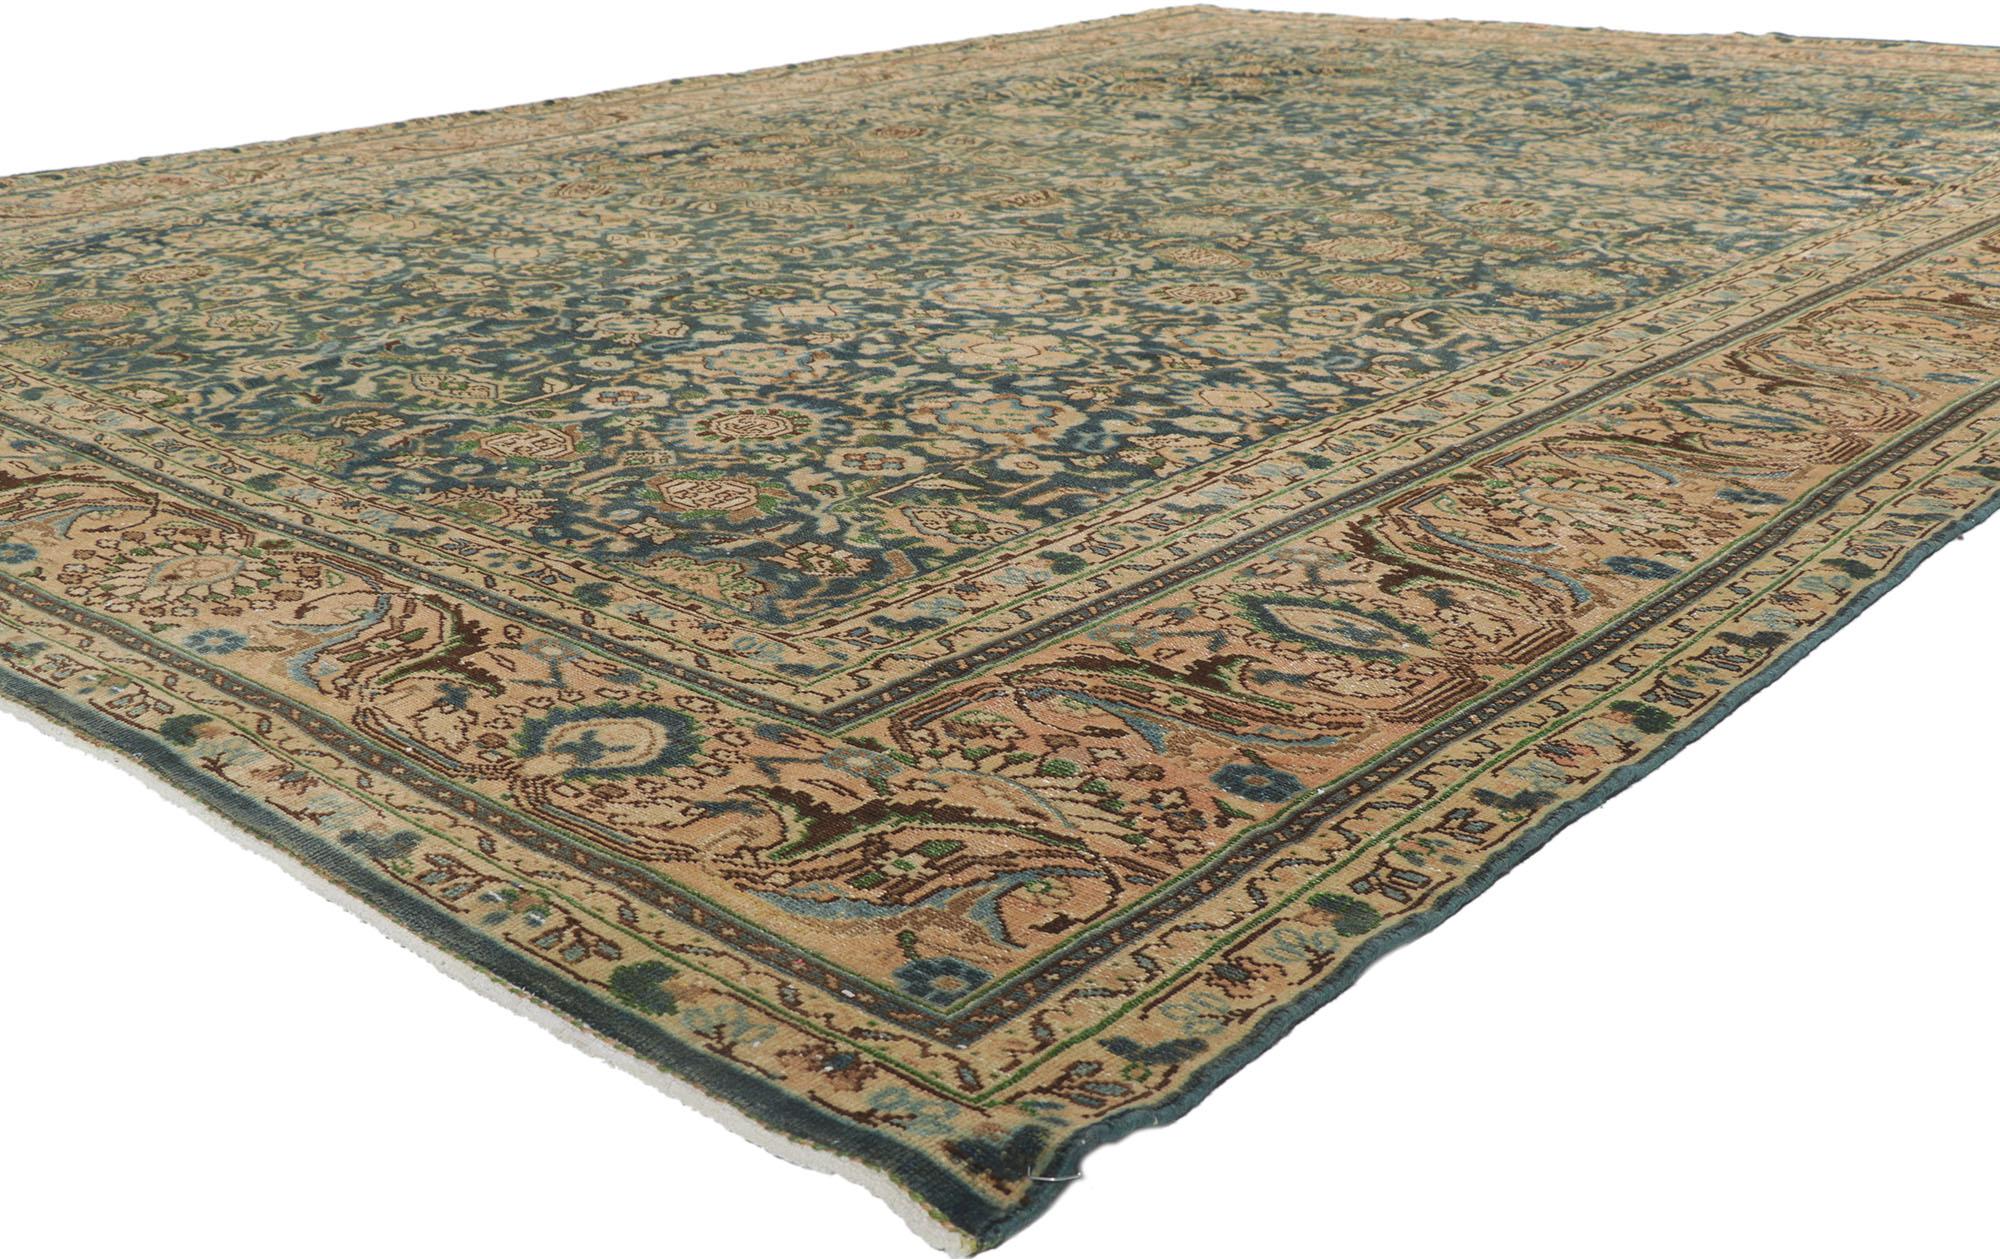 61011 Antique Persian Malayer Rug 10'01 x 13'05. With its effortless beauty and timeless design, this hand-knotted wool antique Persian Malayer rug will take on a curated lived-in look that feels timeless while imparting a sense of warmth and